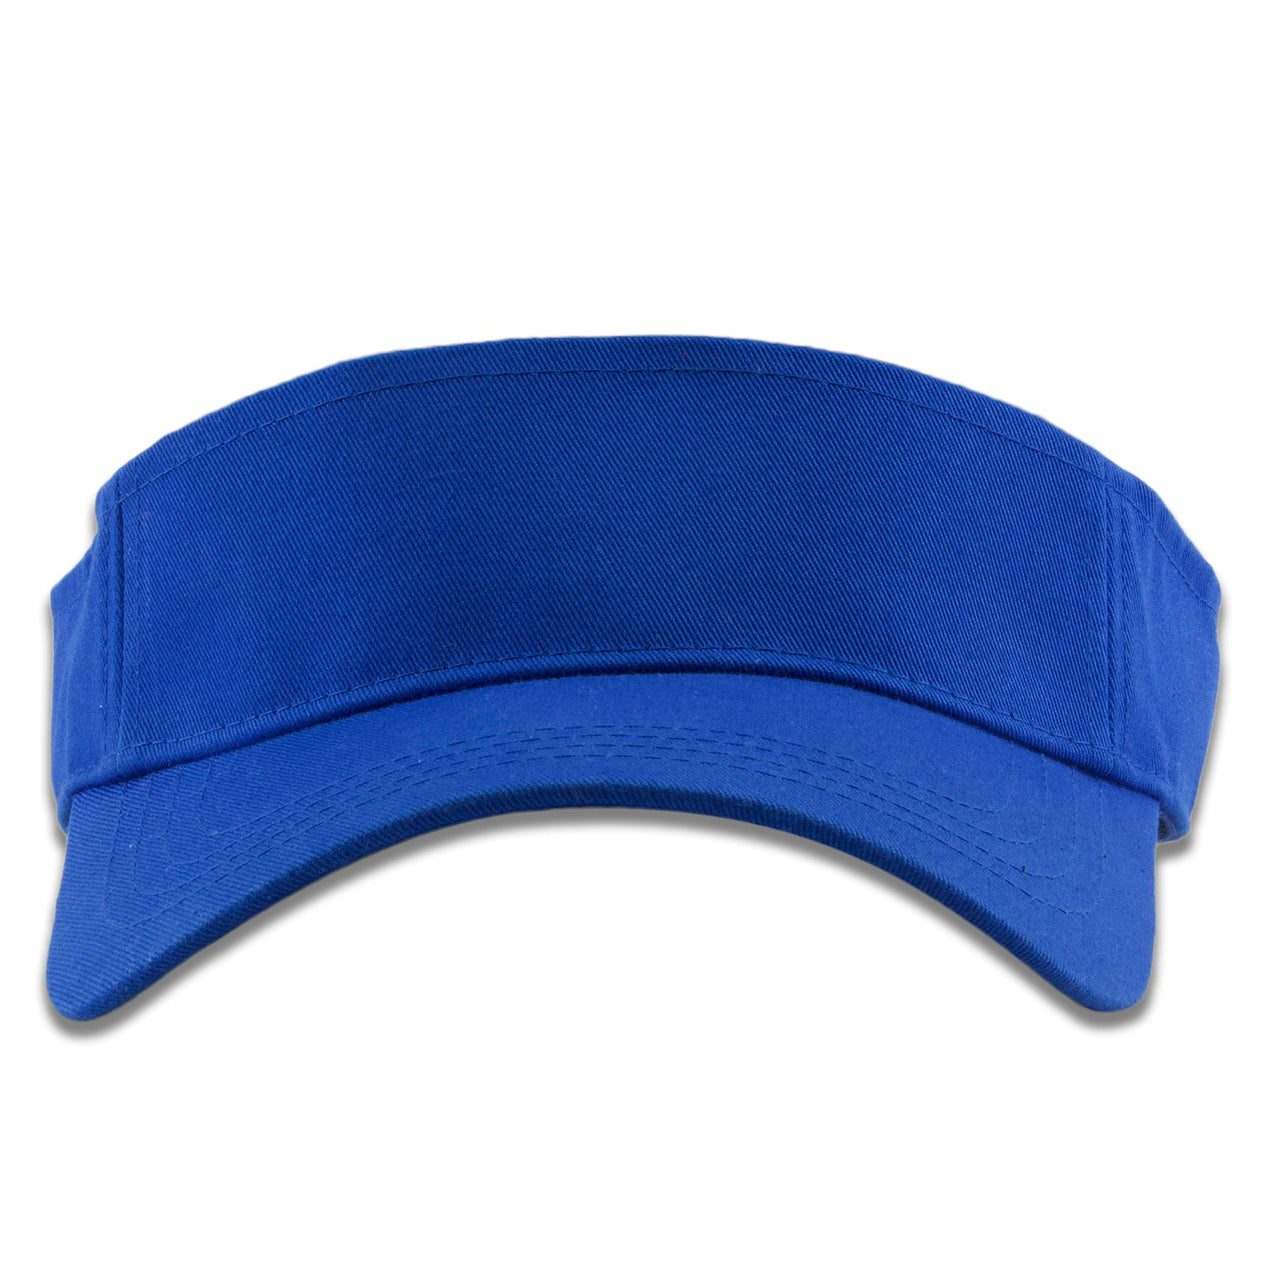 The blue visor is blank and features a curved brim